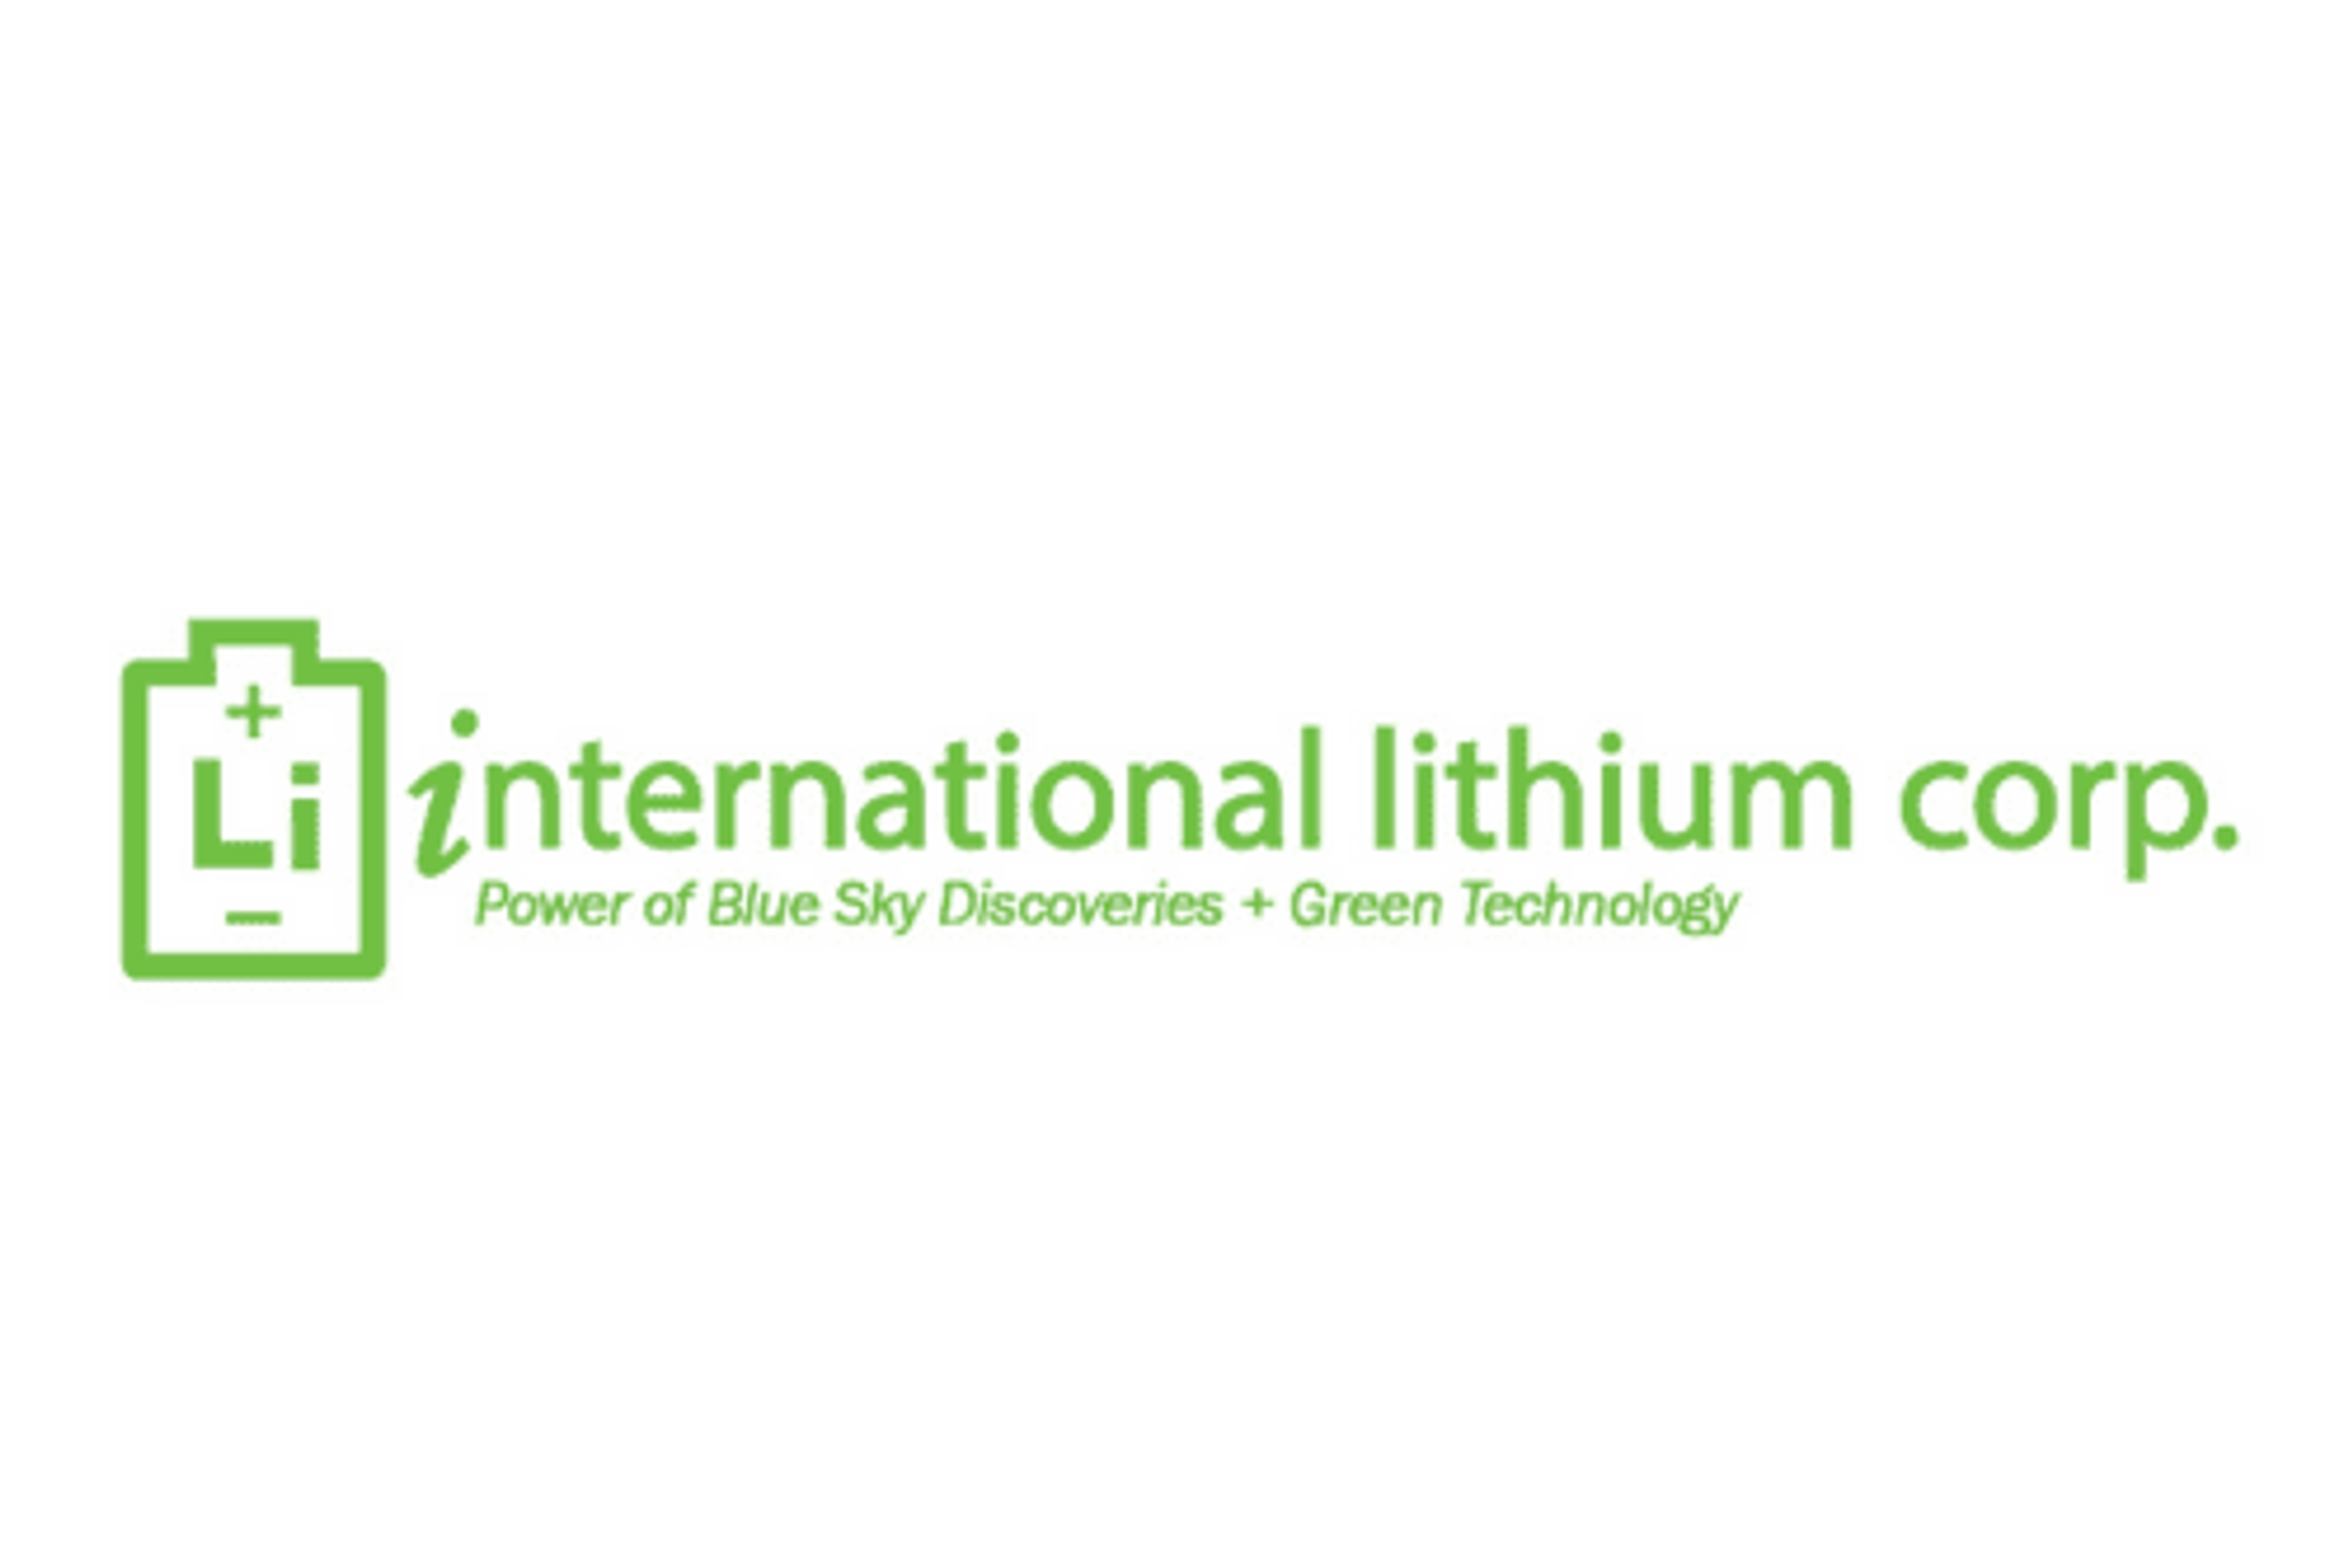 International Lithium Corp. Outlines Tanco-Style Targets With Up to 339 PPM Caesium From Lithogeochemical Survey Results at Raleigh Lake Lithium and Rubidium Project in Ontario, Canada